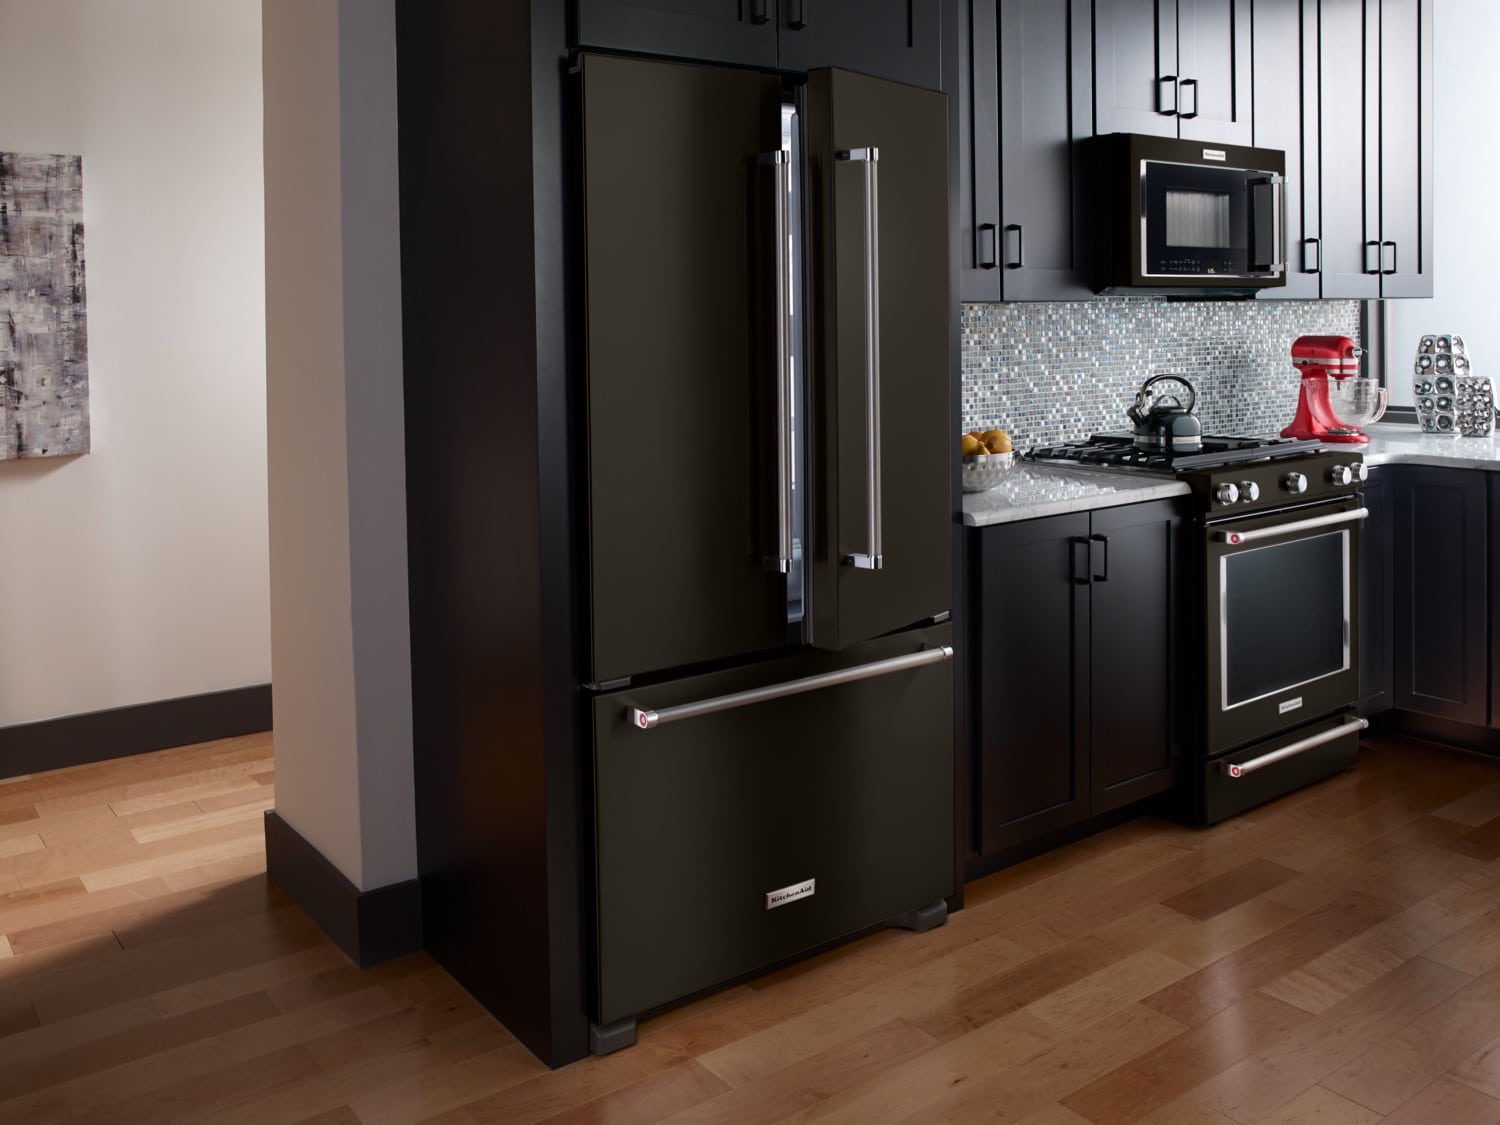 KitchenAid Black Stainless Steel Counter-Depth French Door ...
